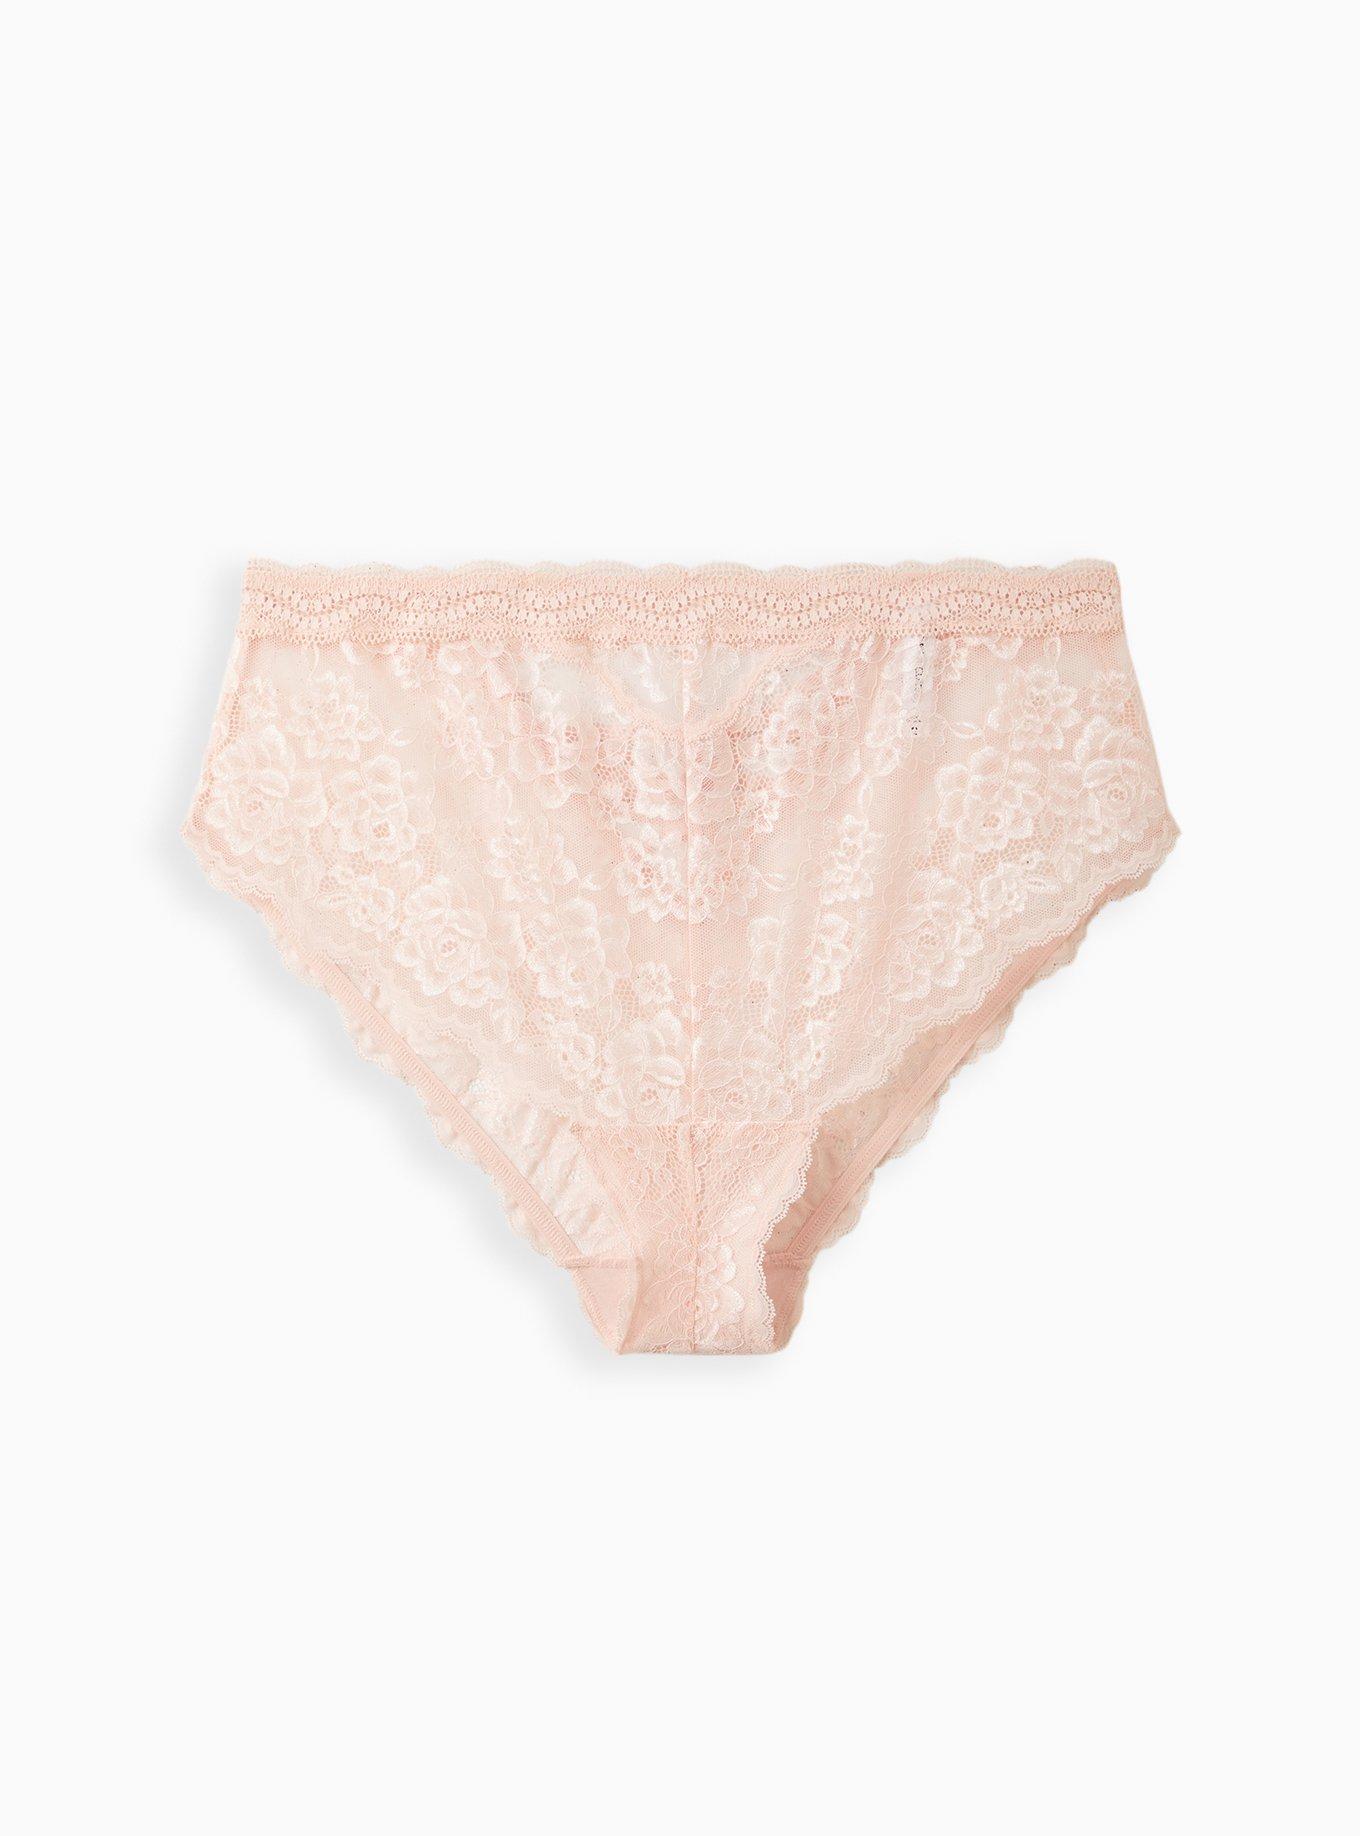 Plus Size - Lace Mid-Rise Cheeky Panty With Lattice Back - Torrid